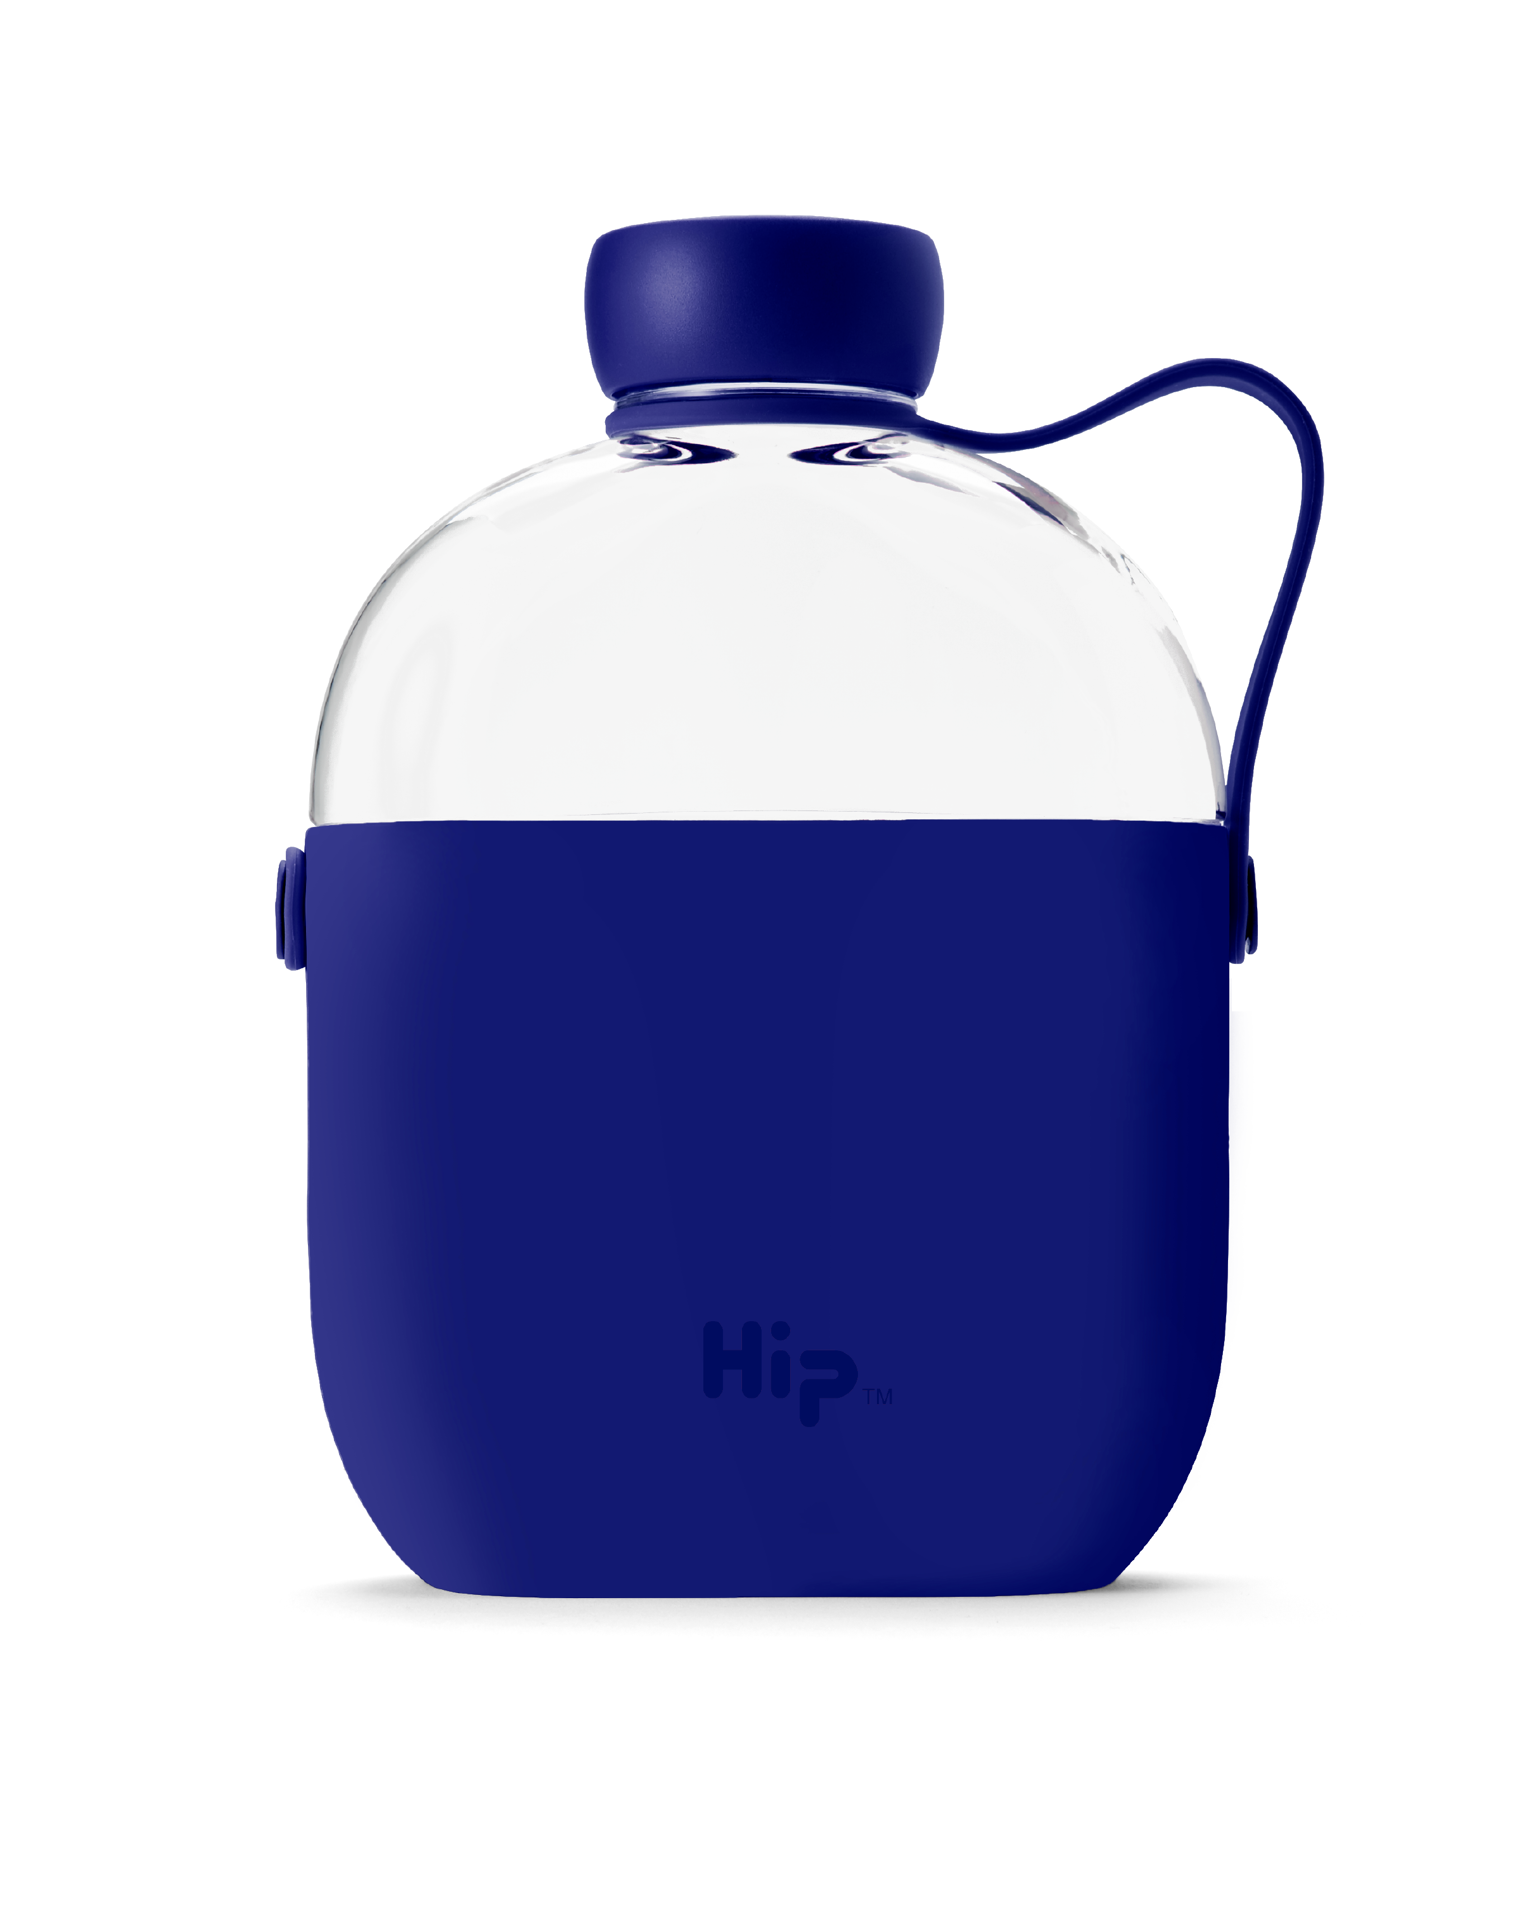 Flask shaped clear drinks bottle with silicone sleeve in blue